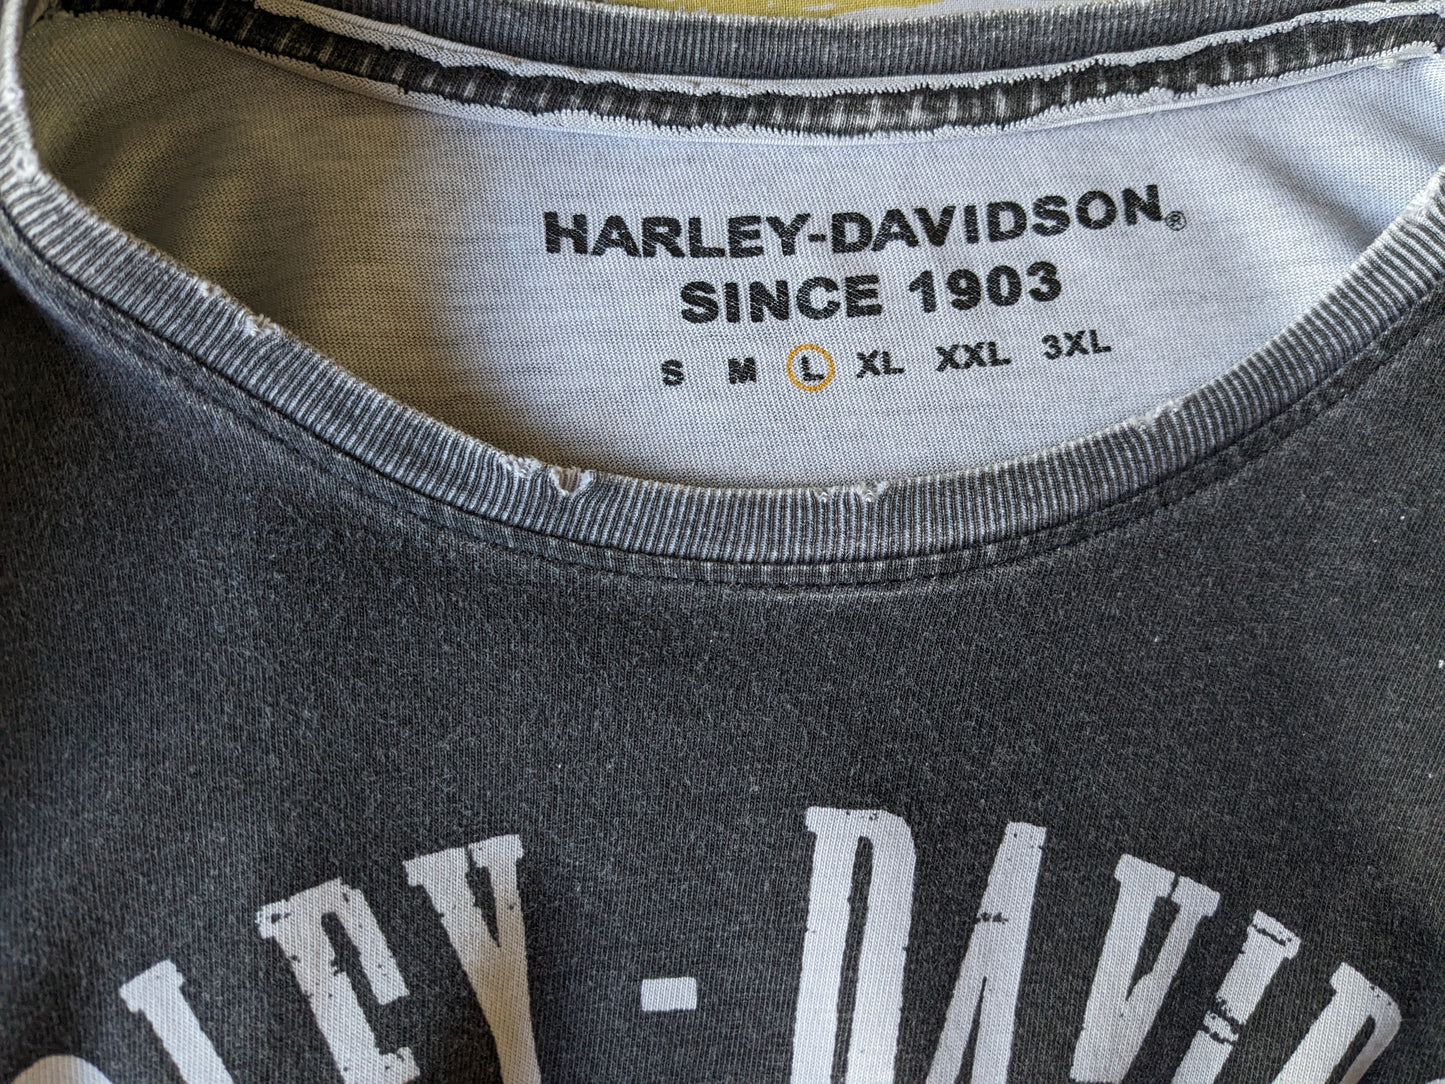 Harley Davidson Longsleeve. Gray white colored. Size L.